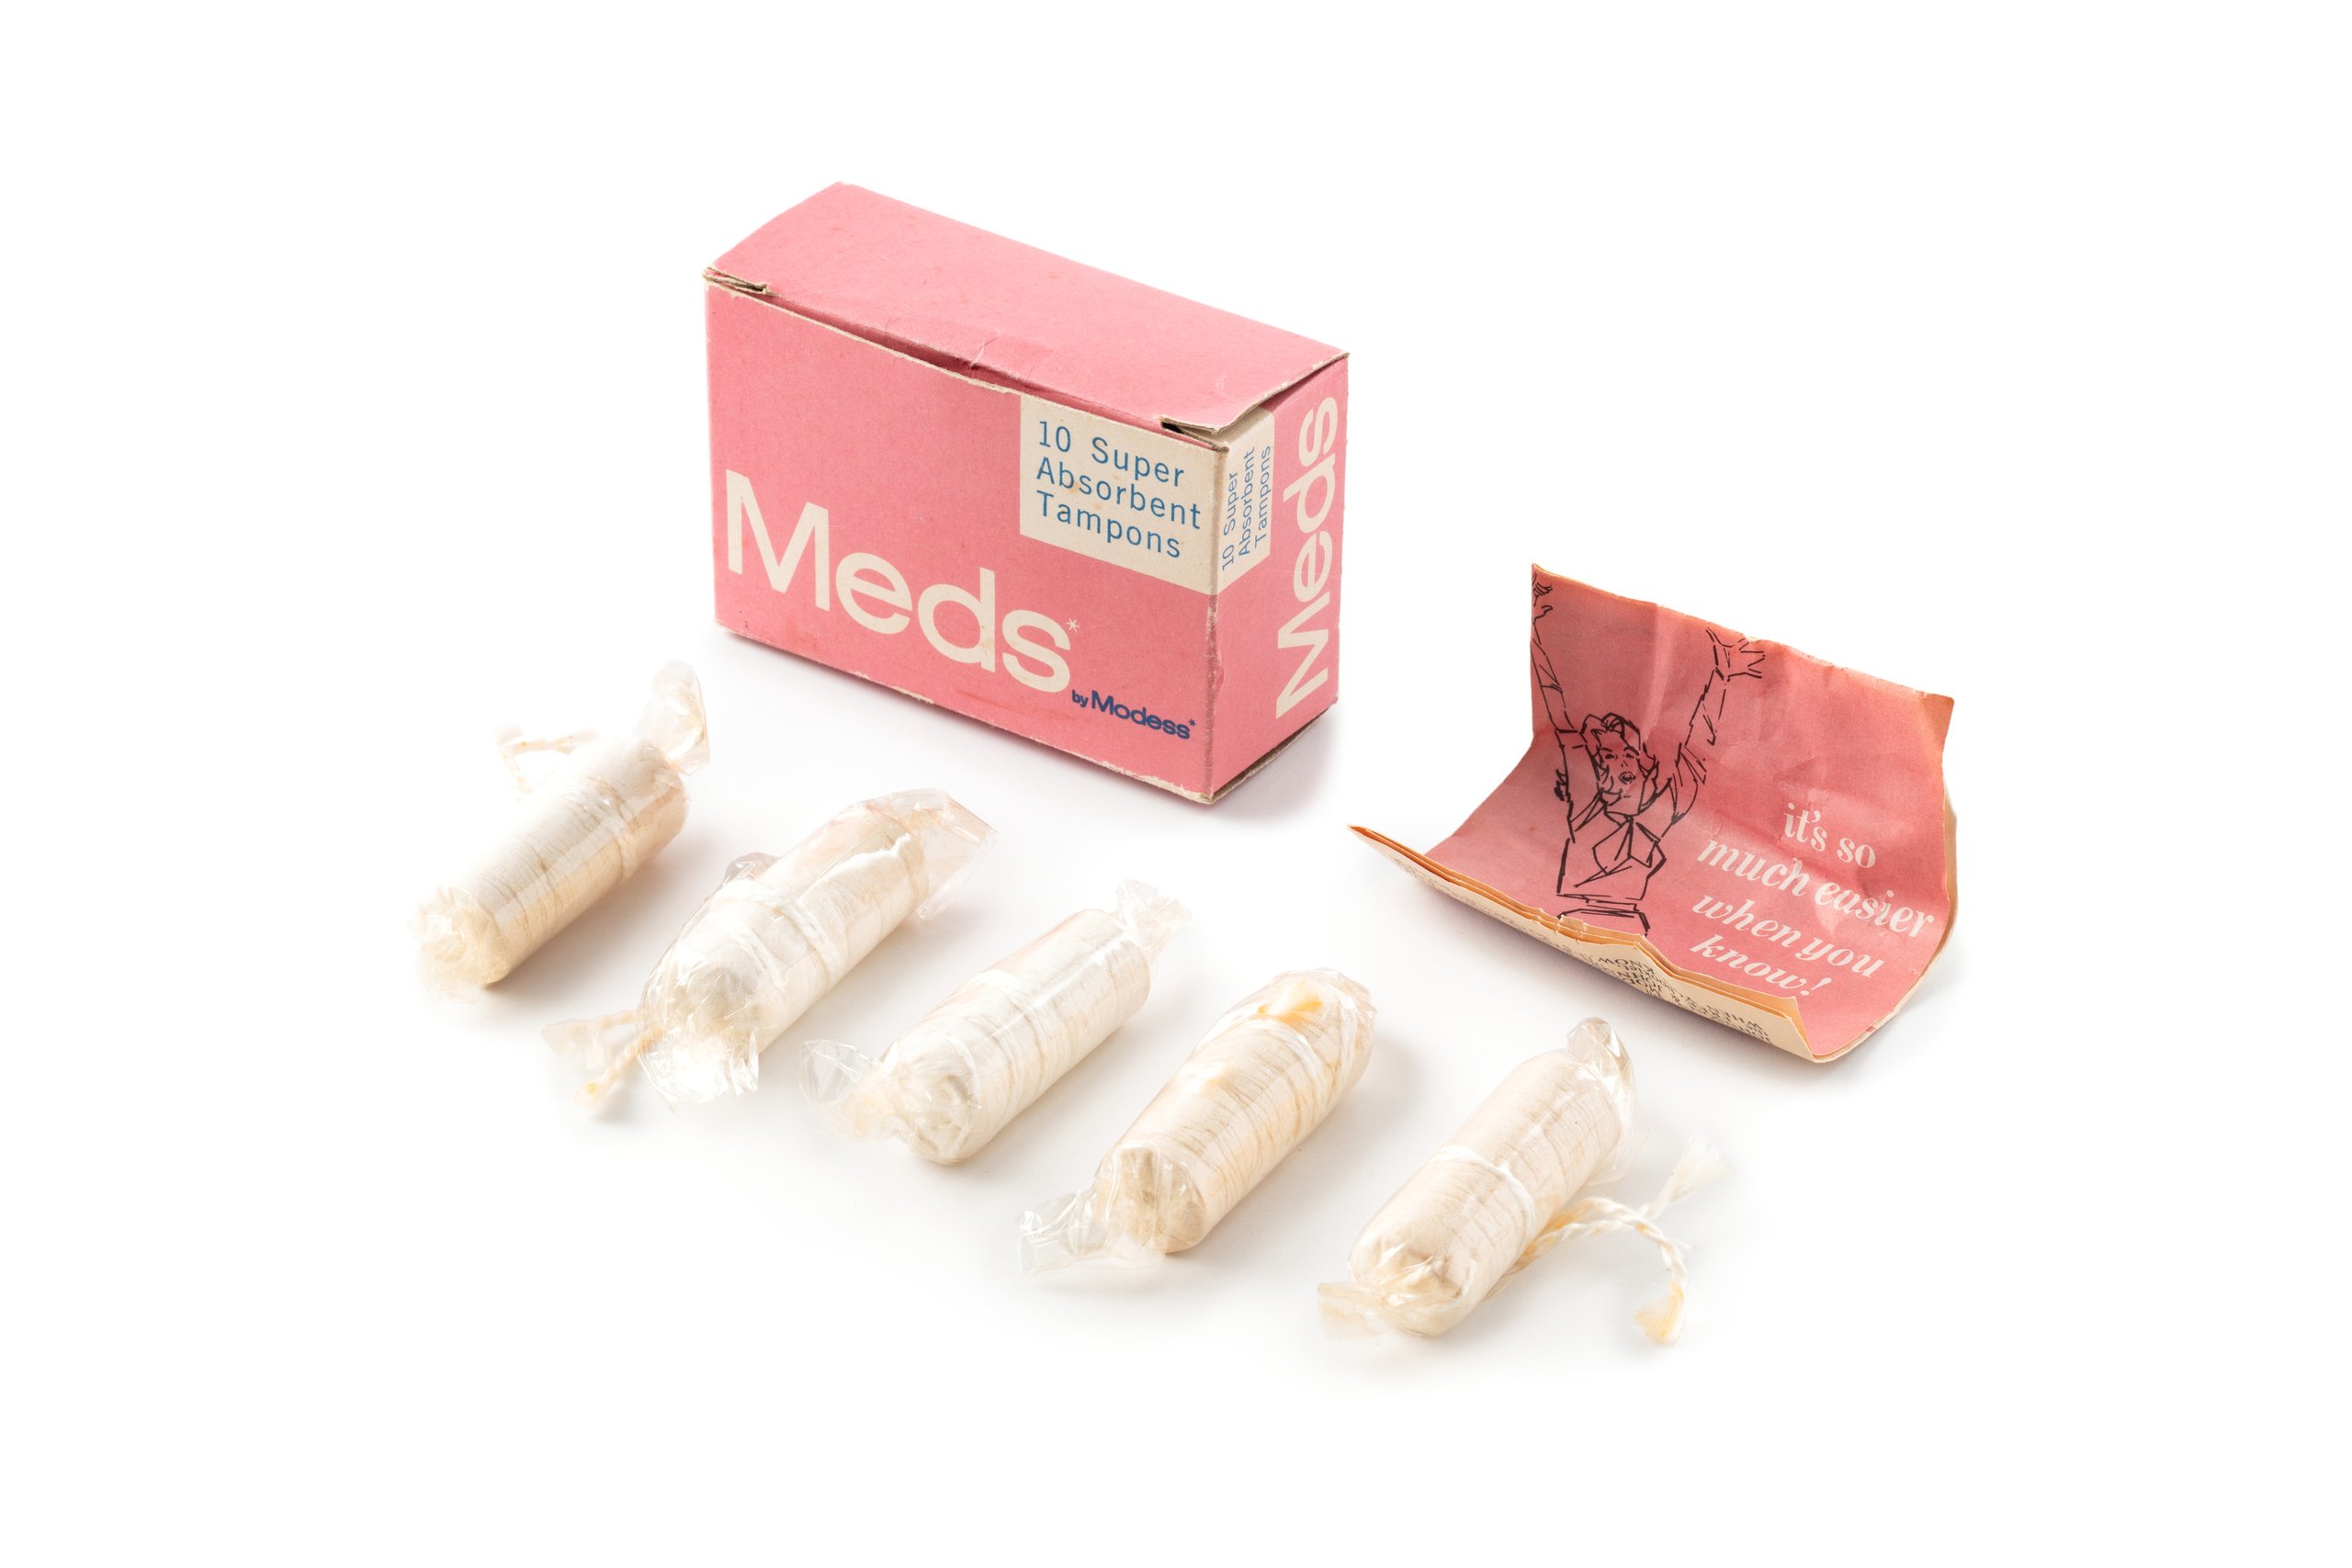 Packet of 'Meds' tampons